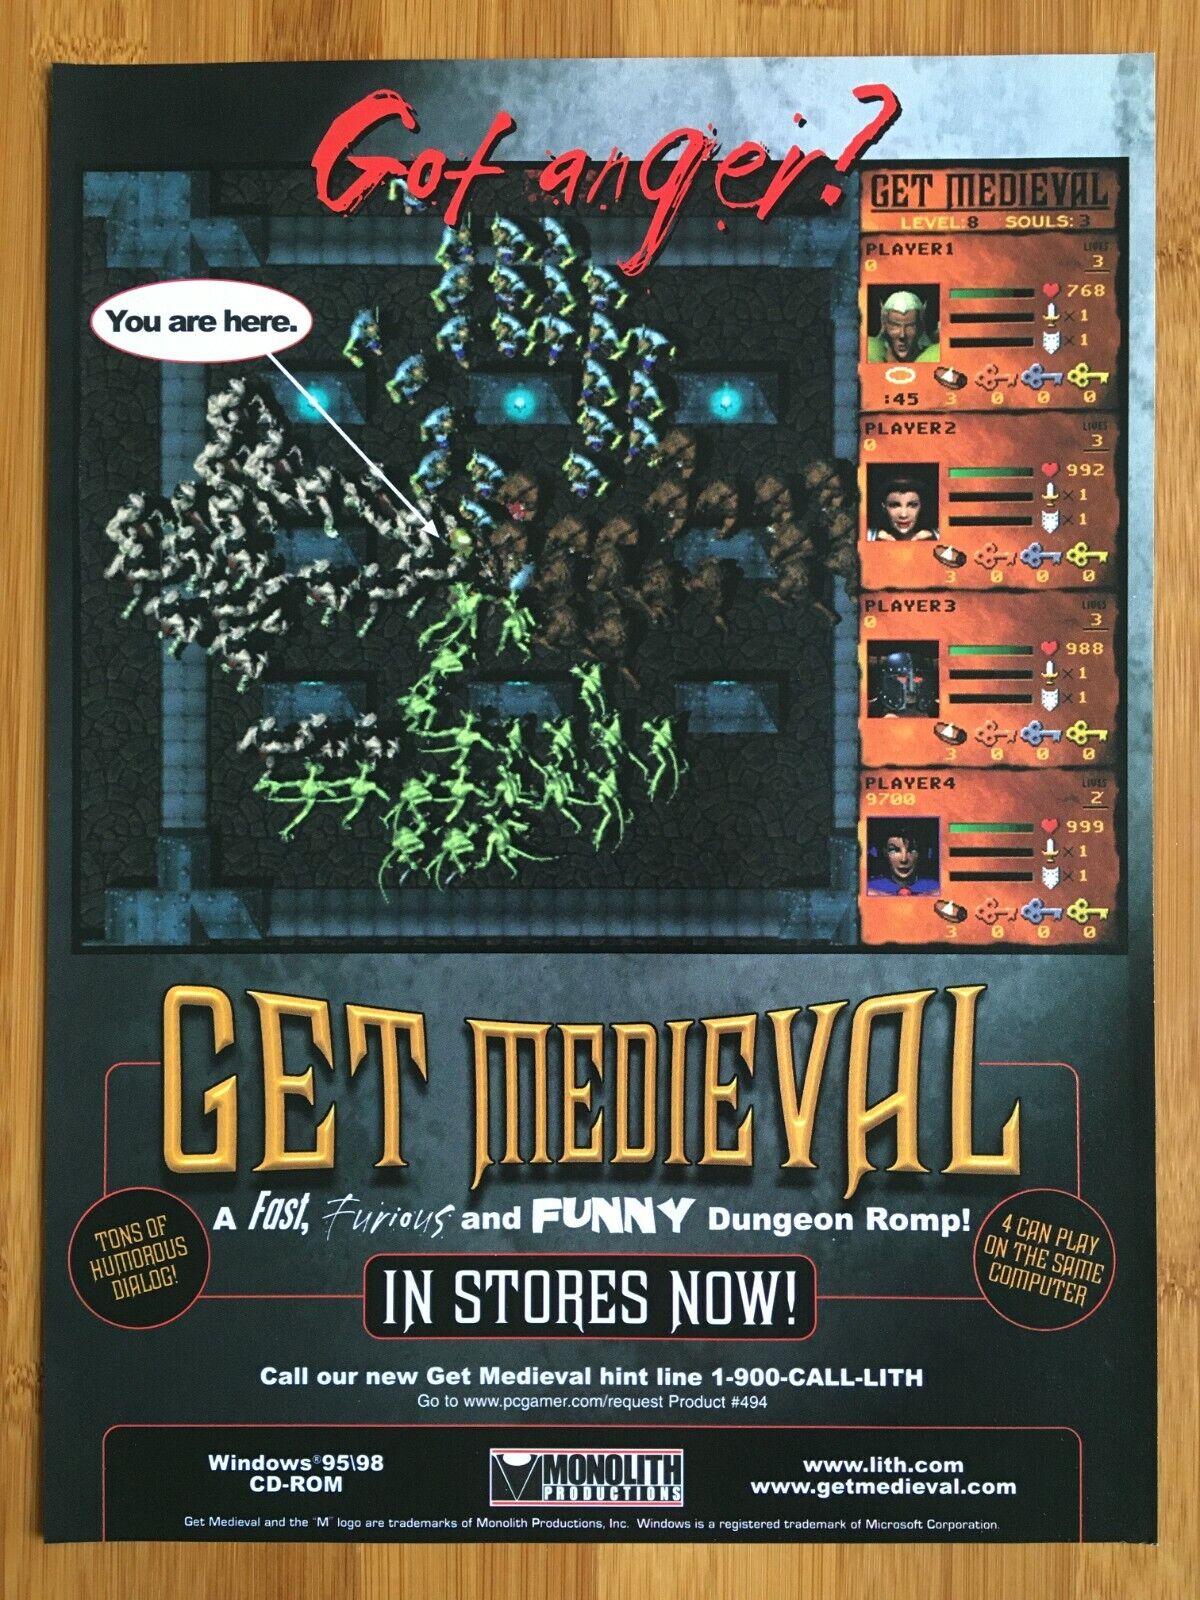 Get Medieval PC 1998 Print Ad/Poster Official Authentic Fantasy Game Promo Art